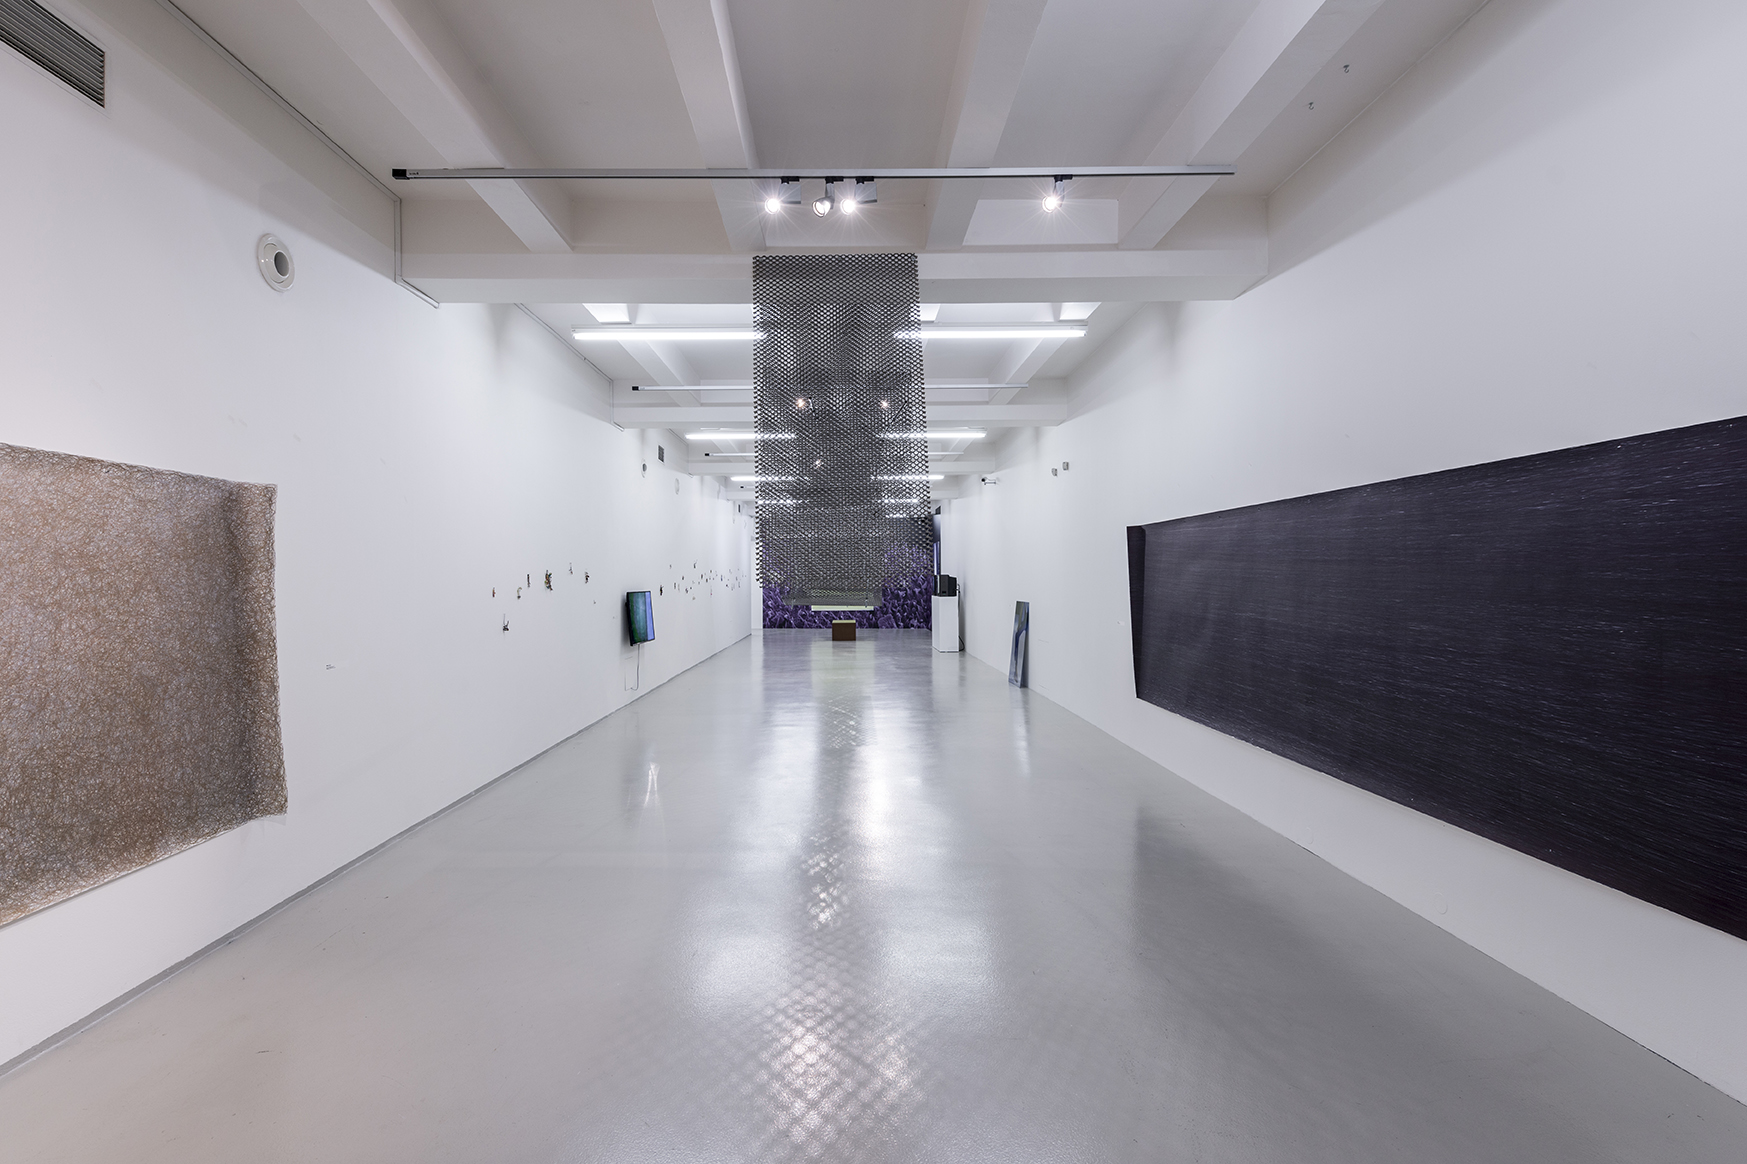 Pole Jam.<br/>1 x 2m sheets of stainless steel expanded mesh and galvanised threaded poles. <br/>Overall dimensions 1 x 2 x 15m. <br/>DOX Gallery Prague <br/>2018 